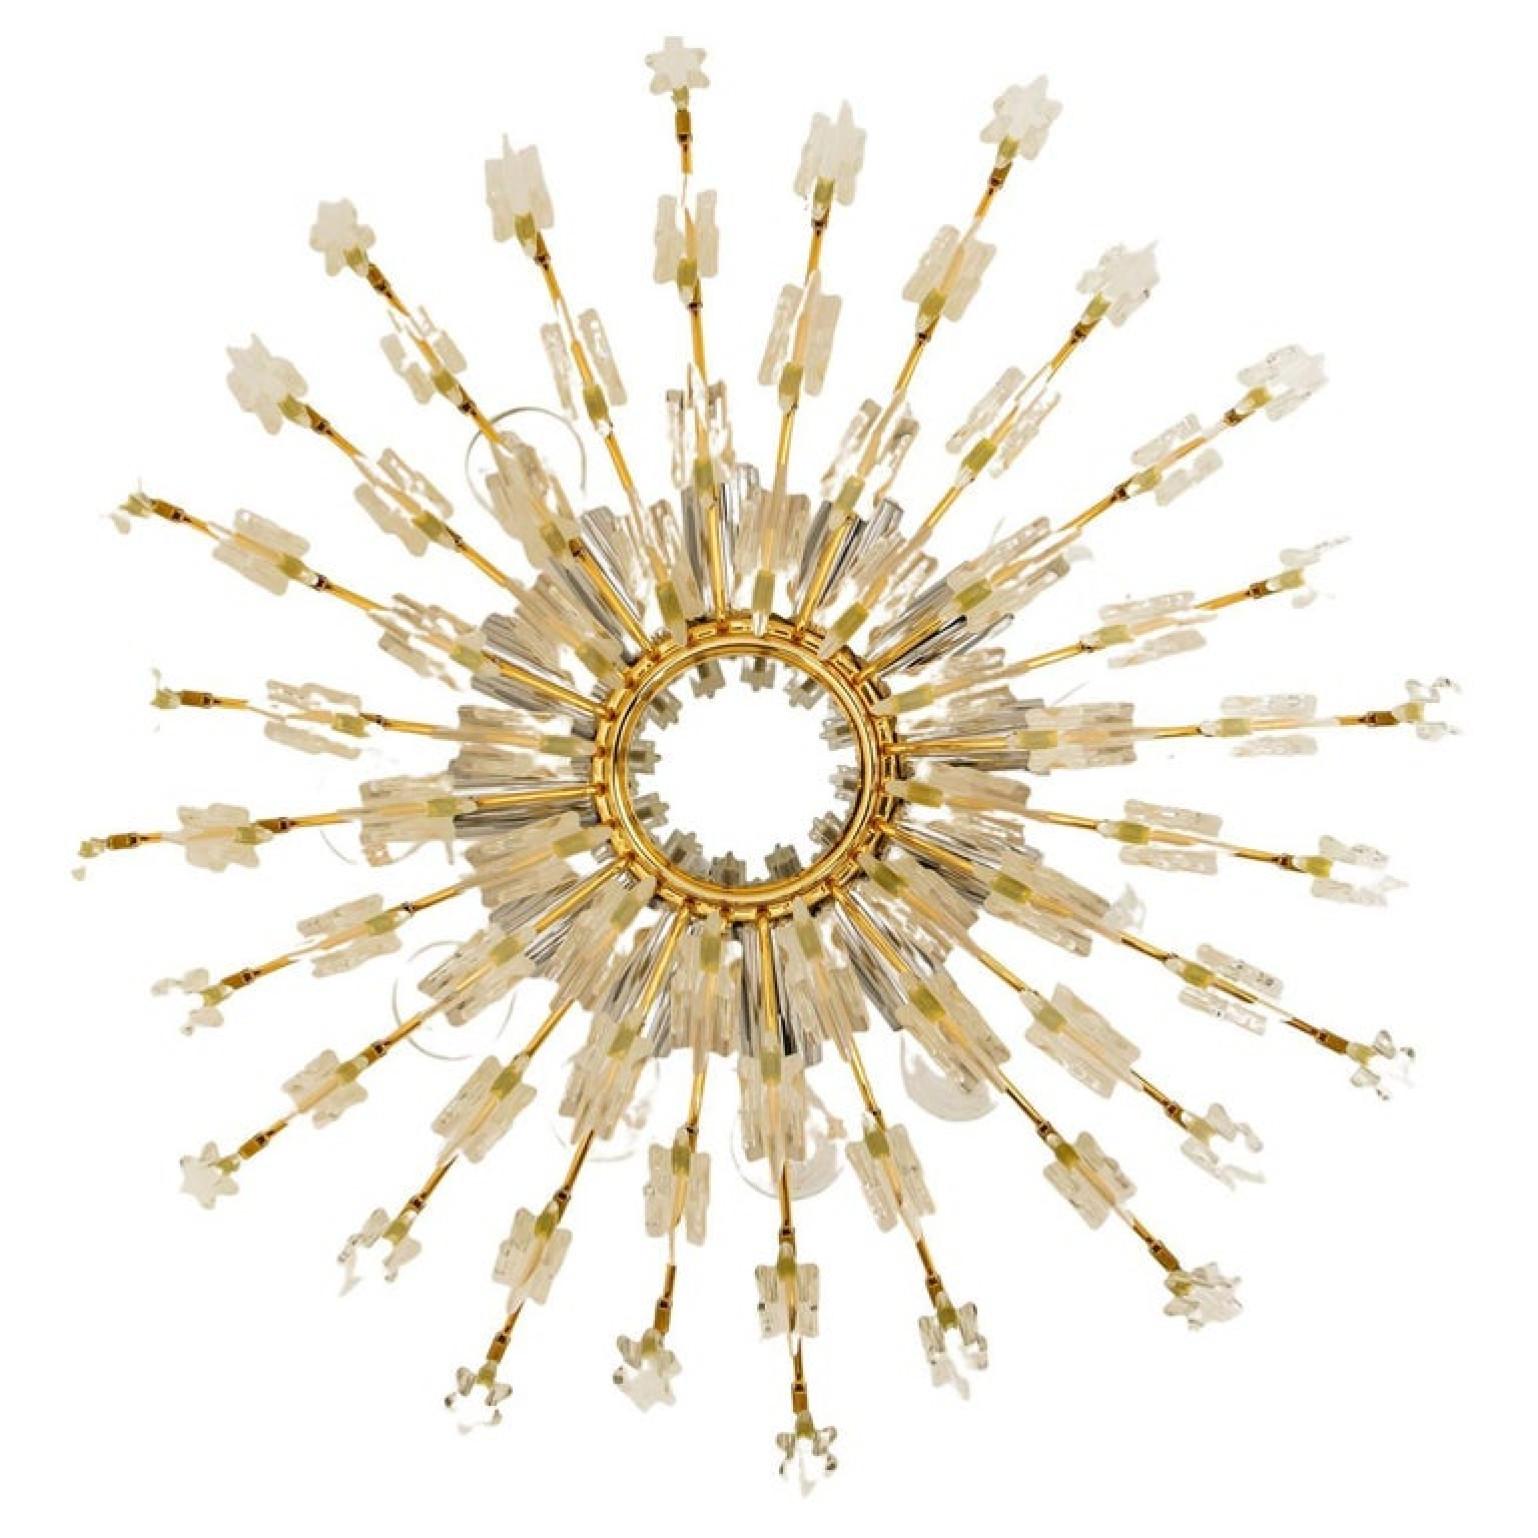 High-end gilded brass flush mount by Stilkronen, made in Italy, circa 1975, featuring a sunburst array of branches holding 30 clear crystals pieces. The crystals refract light beautifully and are perfect for a soft, warm and welcoming glow in the